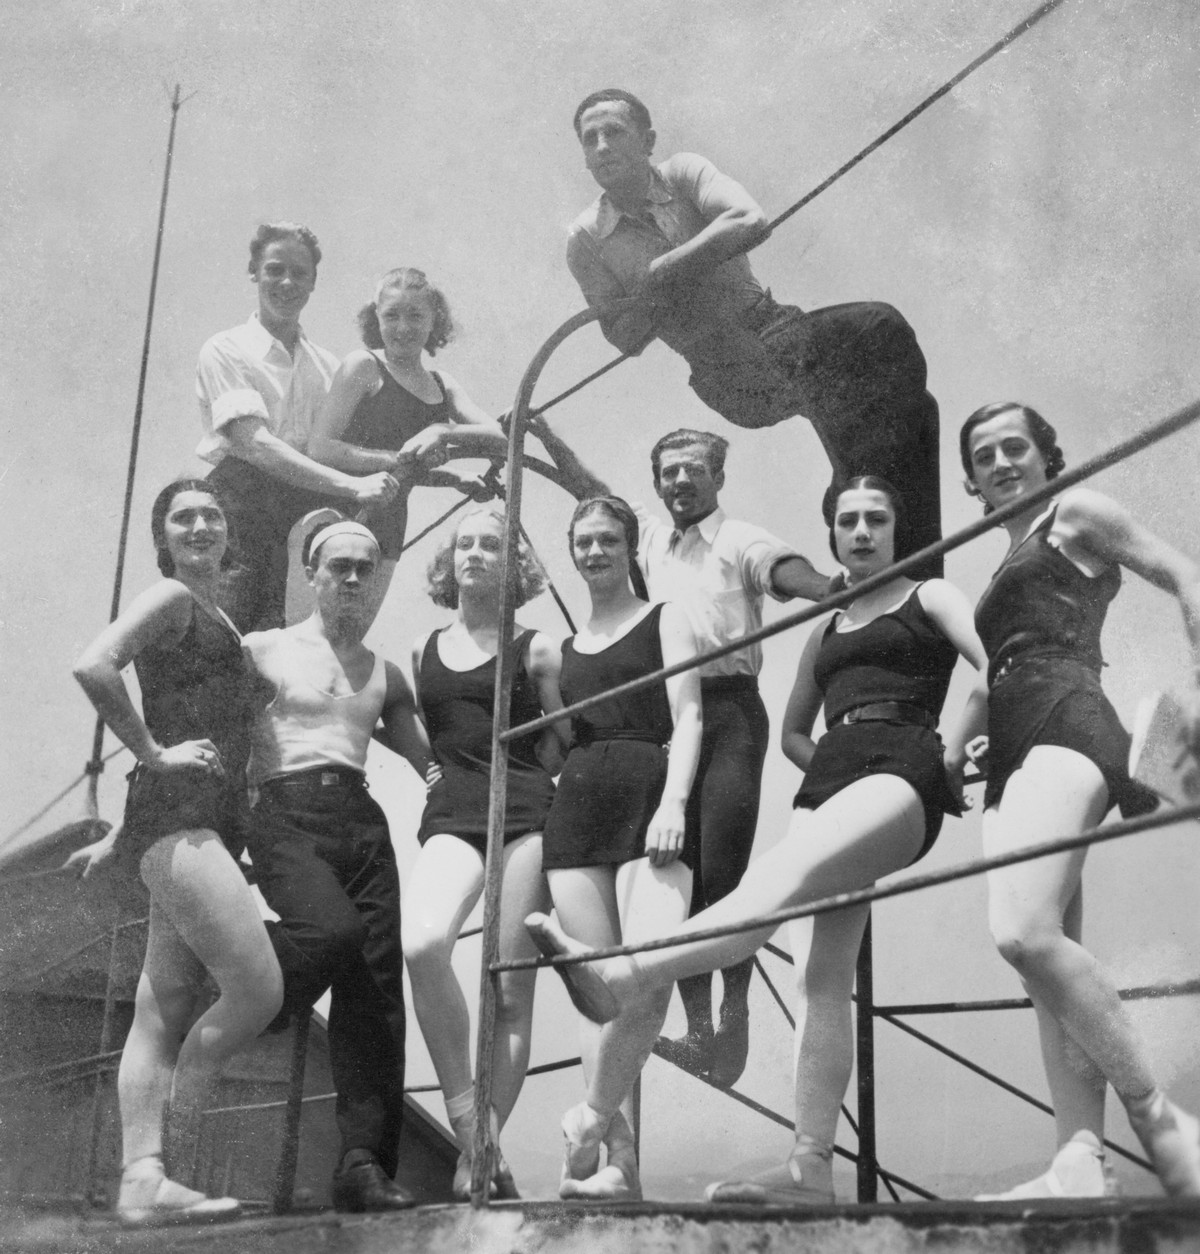 Rehearsing on the roof of Les Chatelets theater (1933)